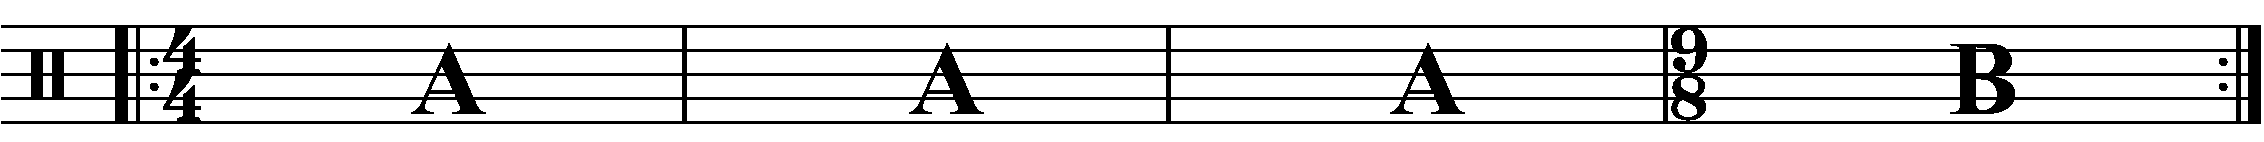 A four bar phrase using simple time 9/8 for the 'B' section.